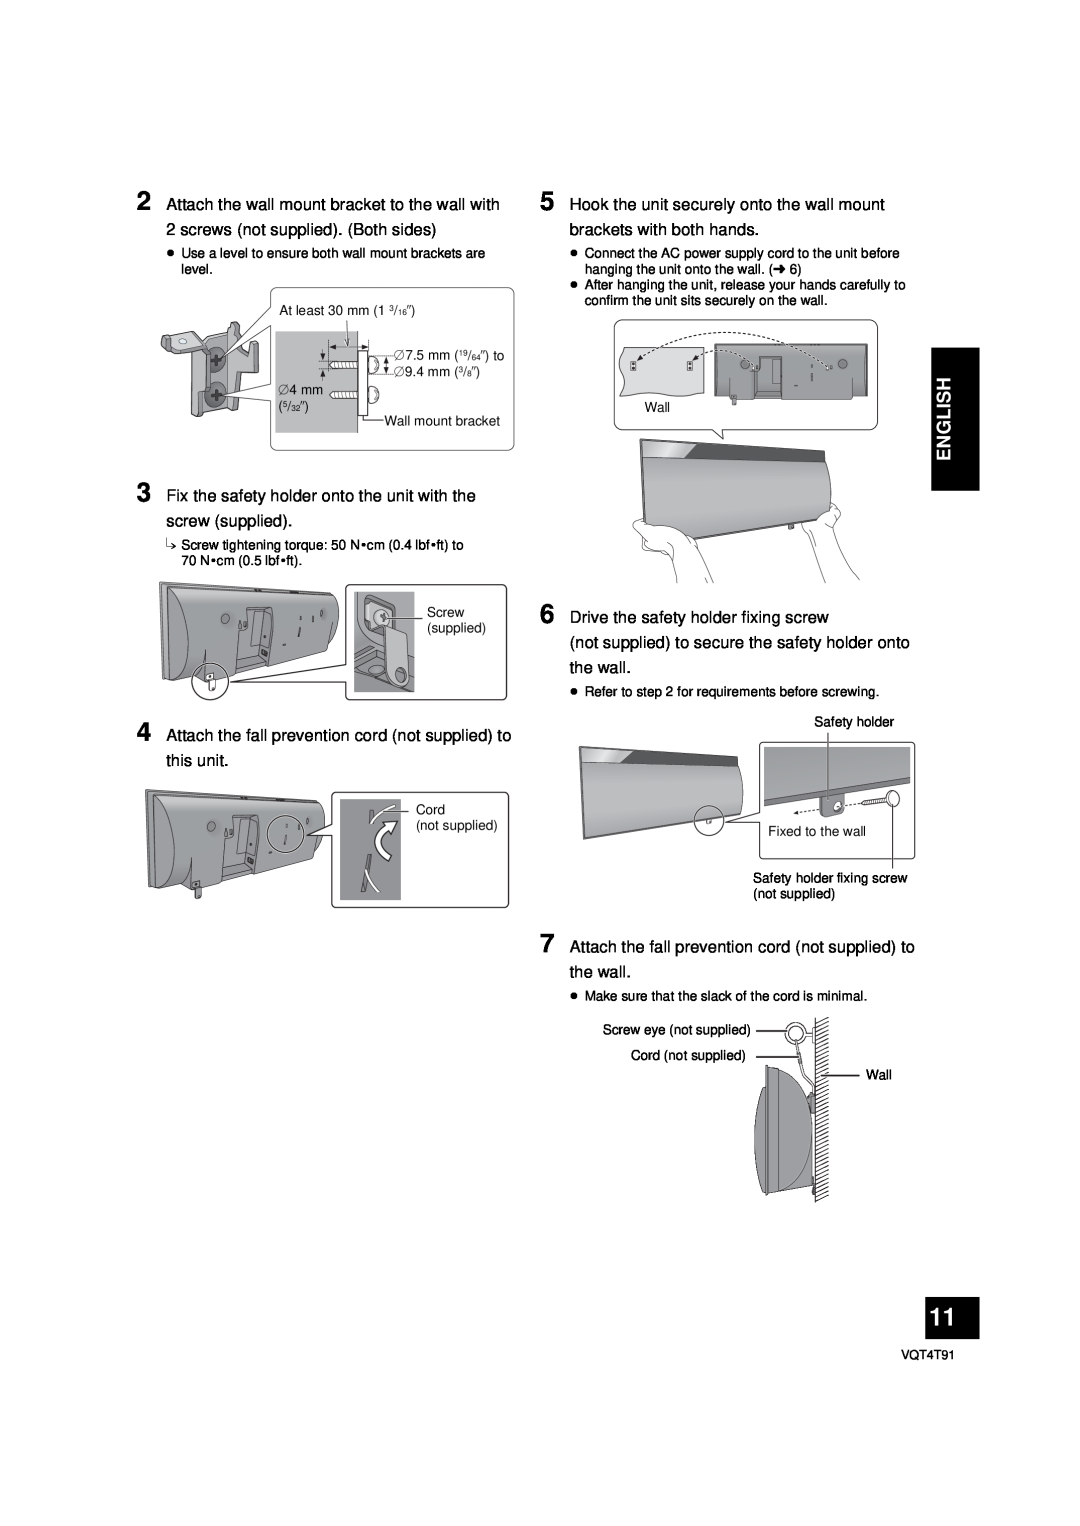 Panasonic SC-NE1 owner manual English, Attach the wall mount bracket to the wall with 